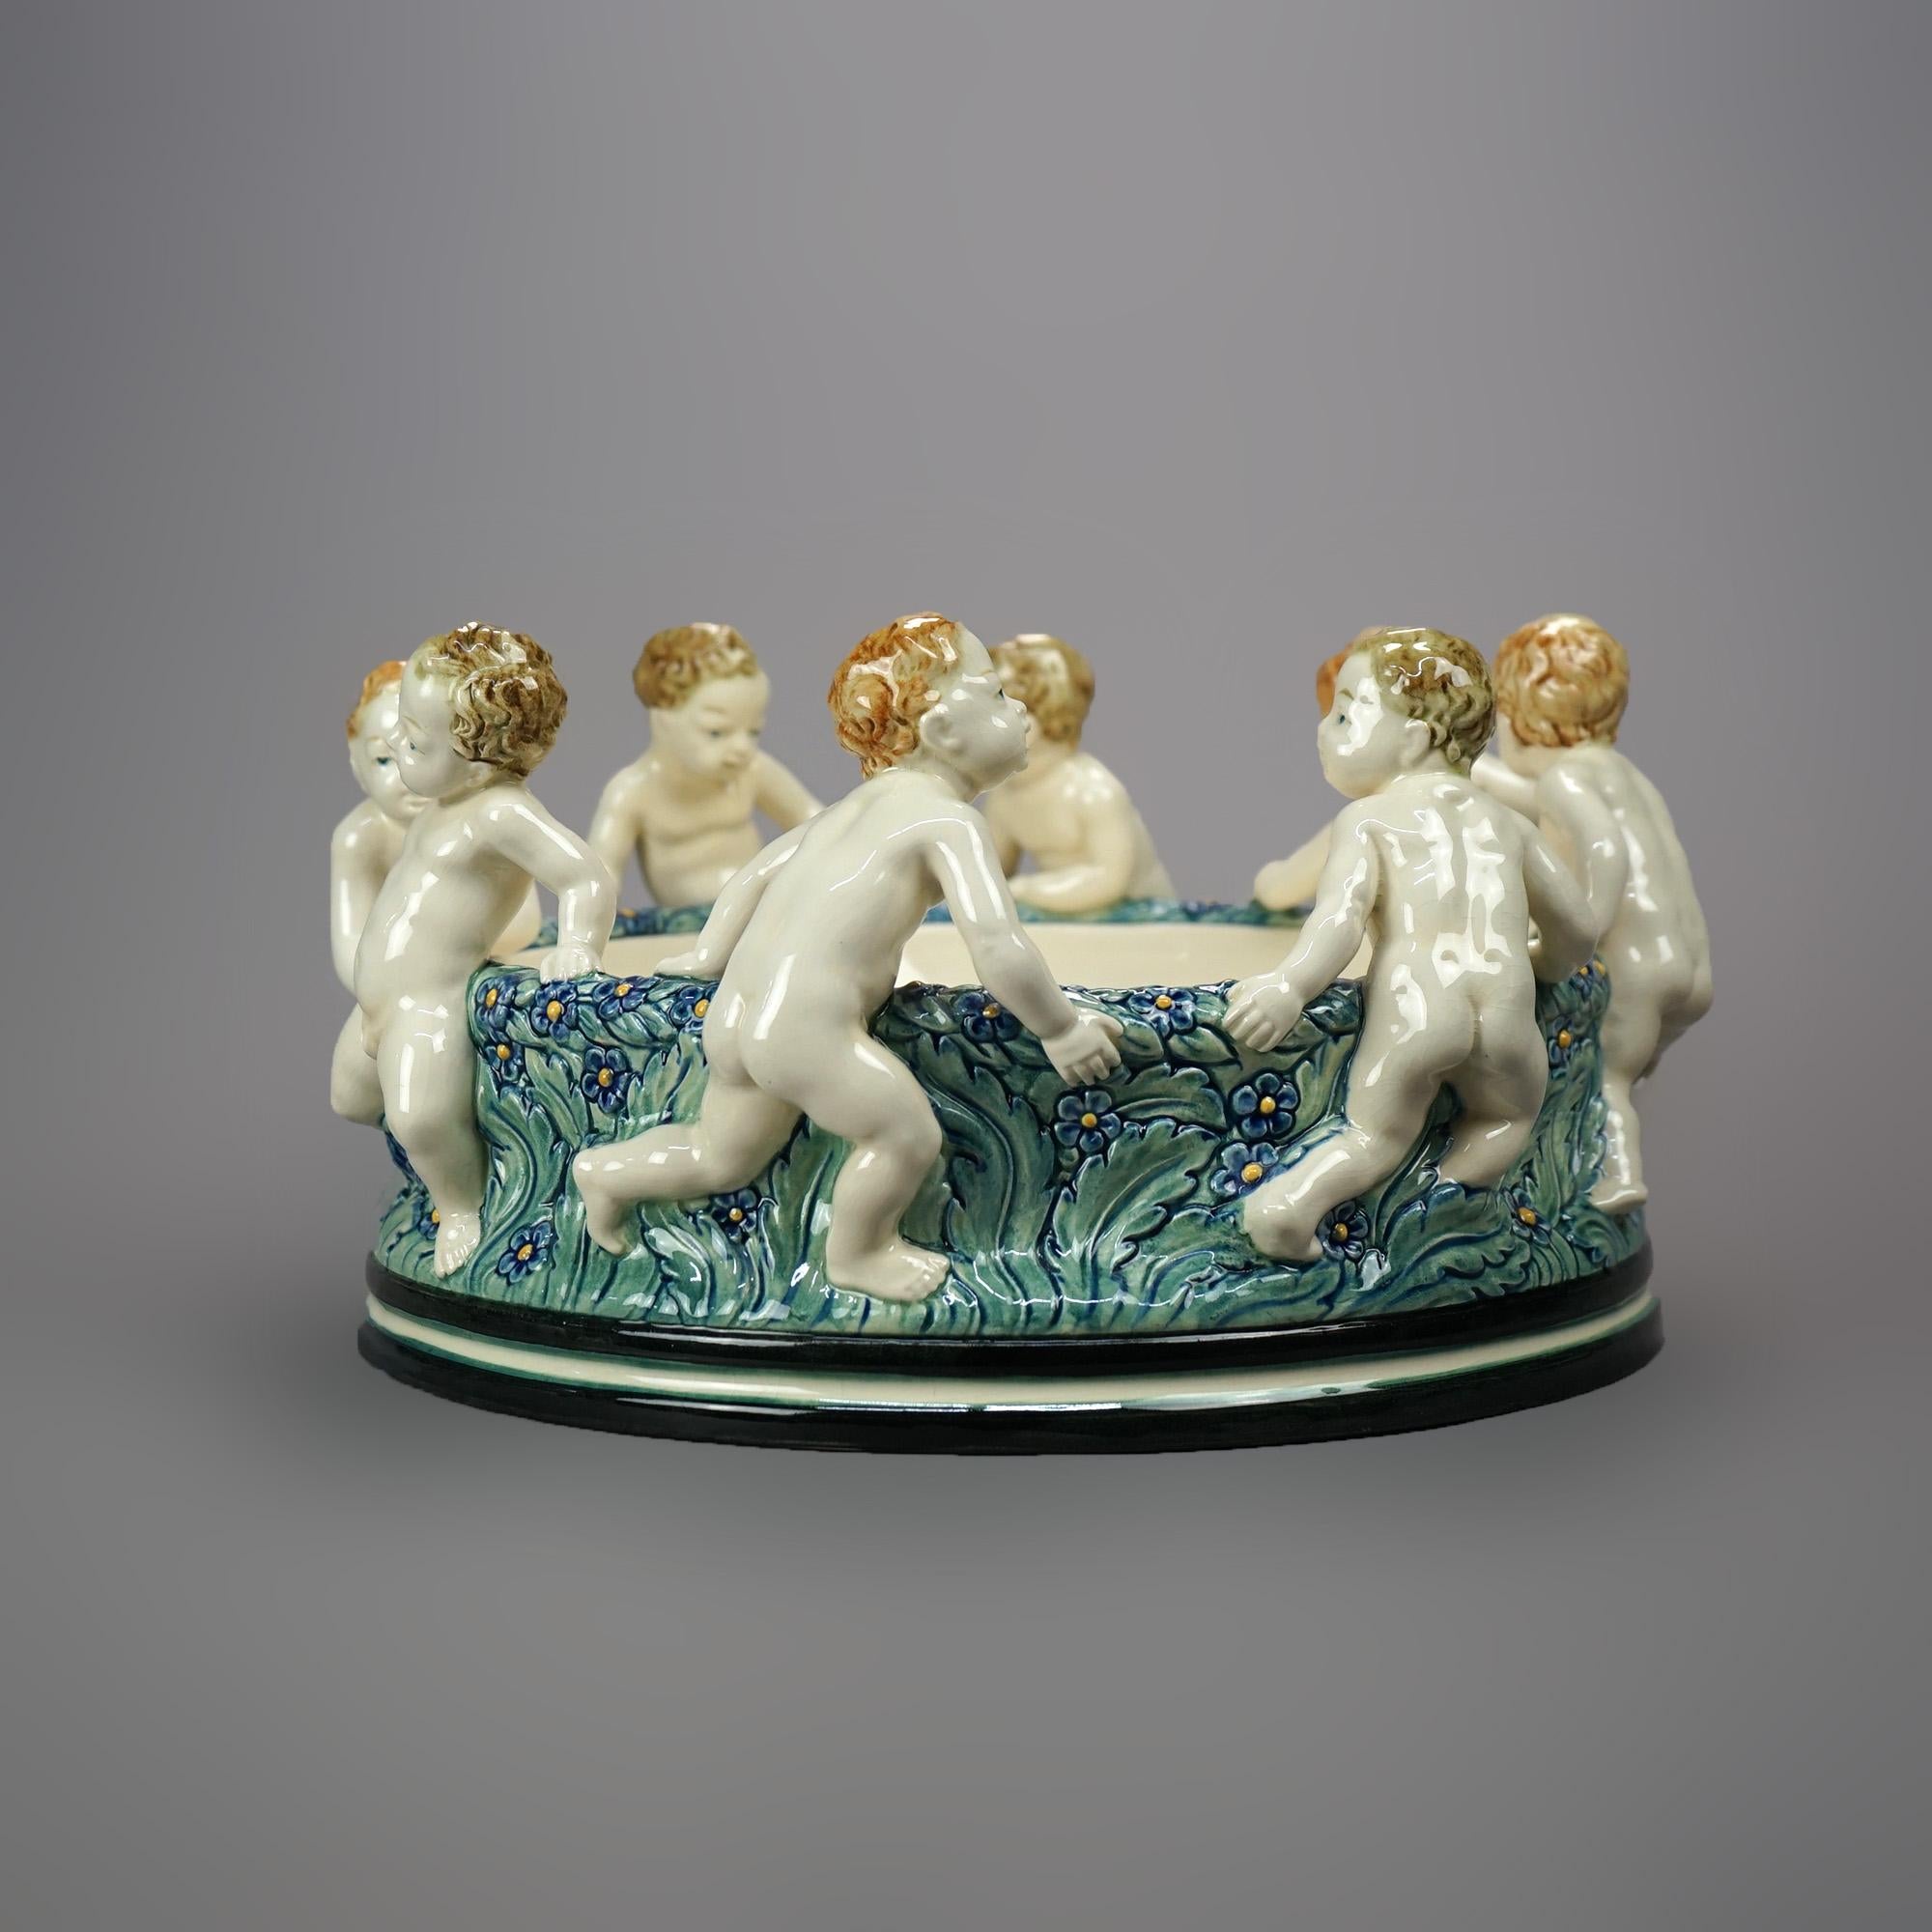 Classical Greek Antique Figural Wilhelm Majolica Pottery Center Bowl with Classical Putti, c1900